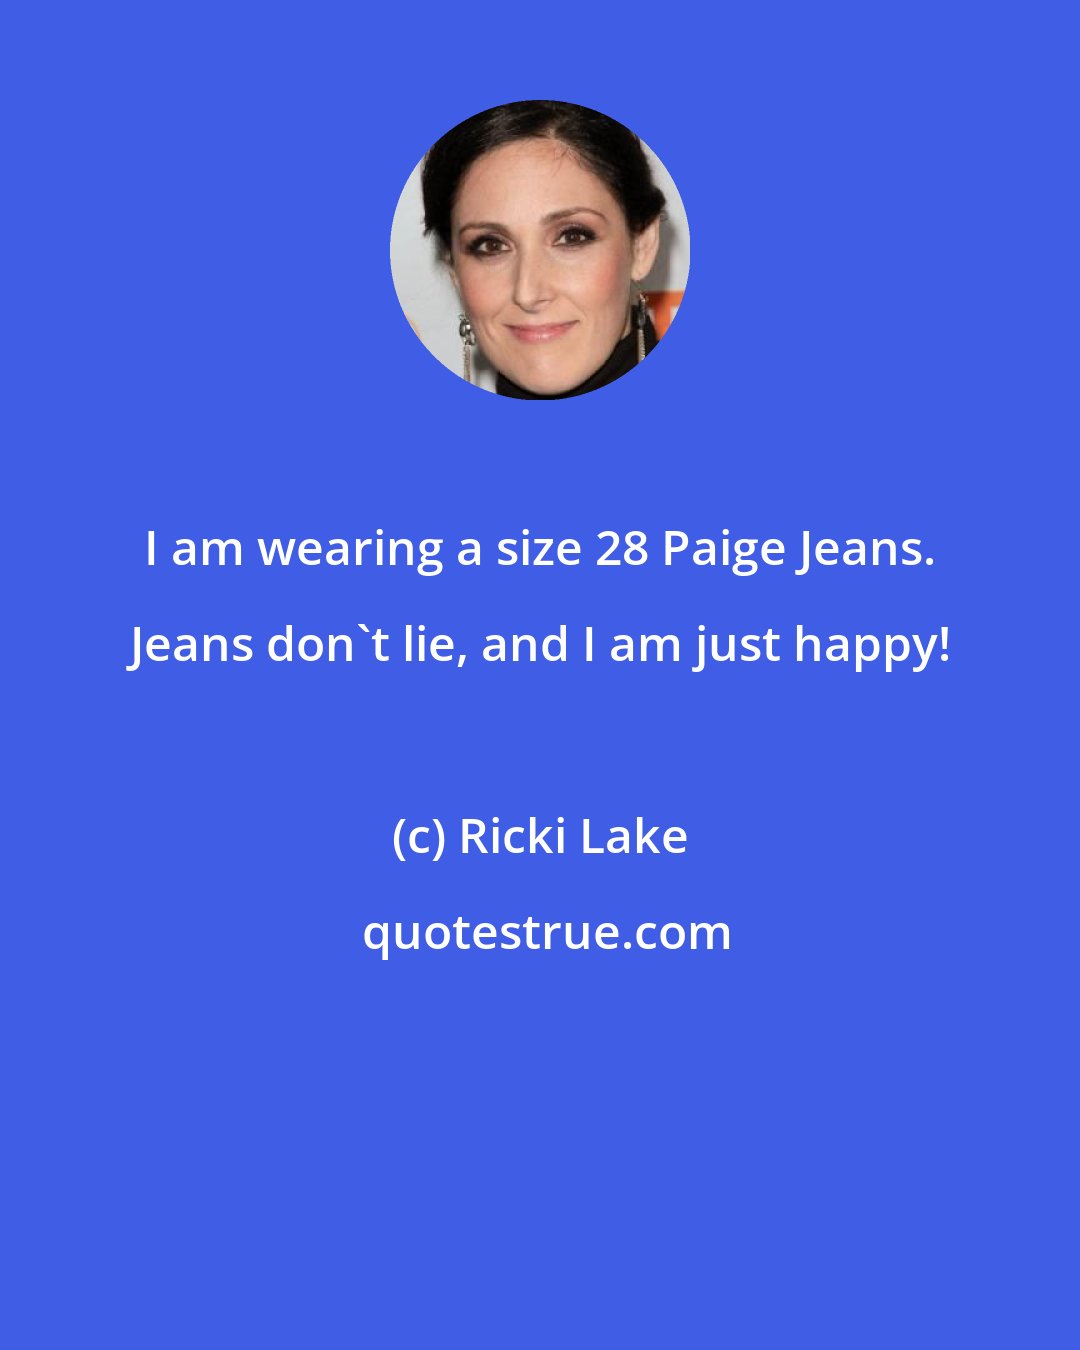 Ricki Lake: I am wearing a size 28 Paige Jeans. Jeans don't lie, and I am just happy!